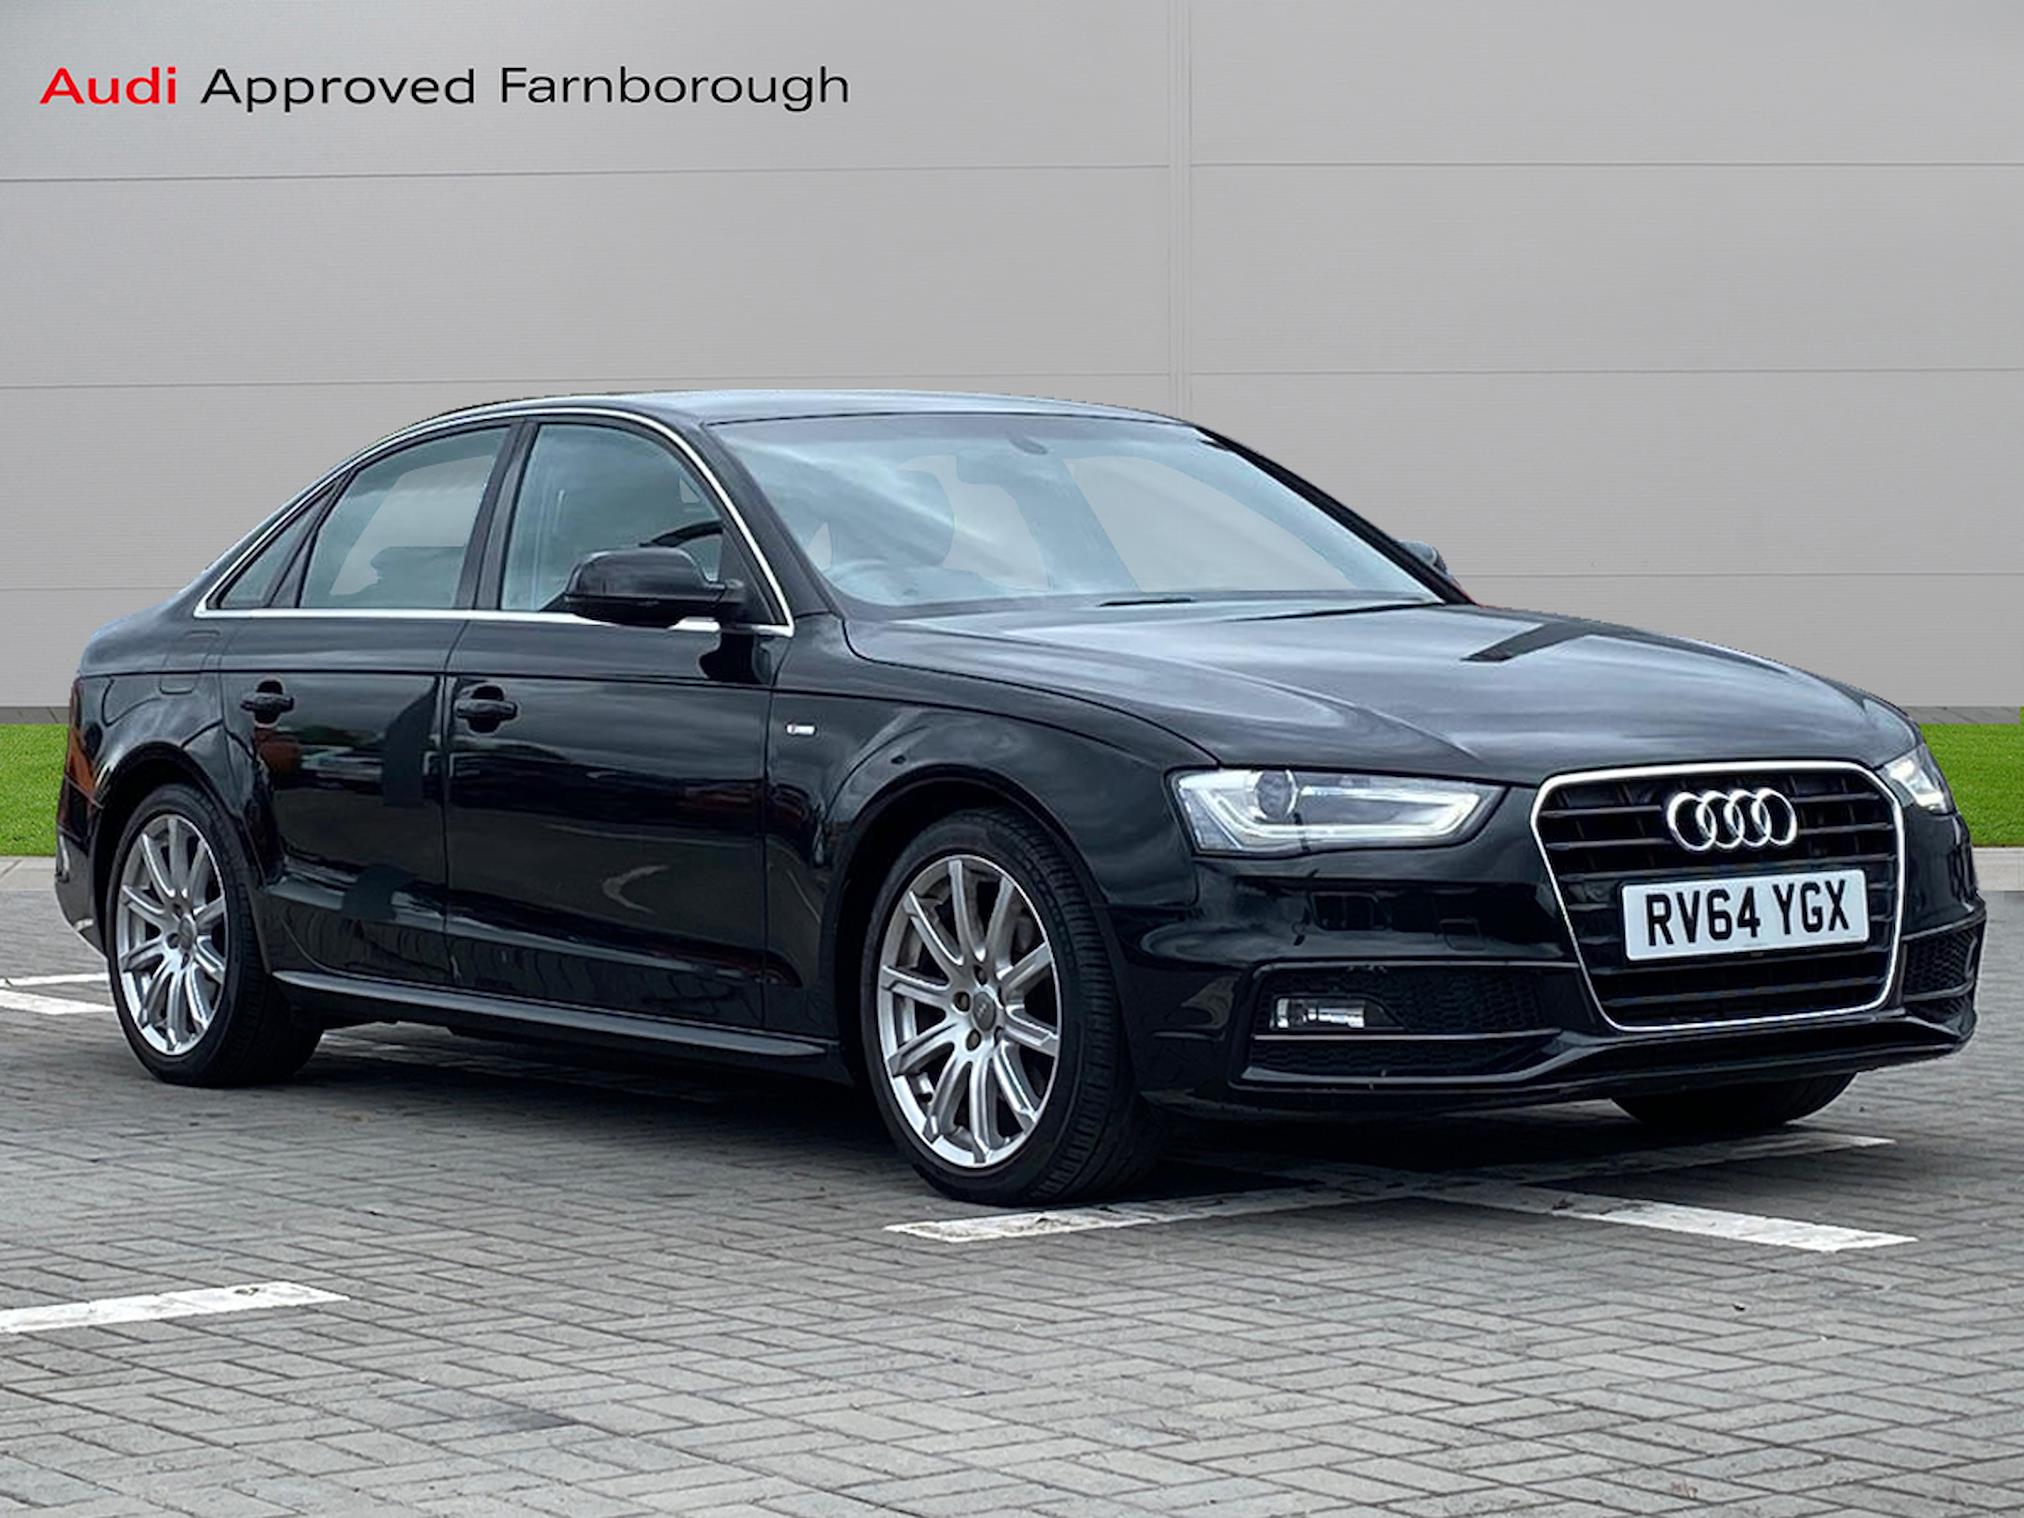 Used AUDI A4 1.8T Fsi 170 S Line 4Dr 2014